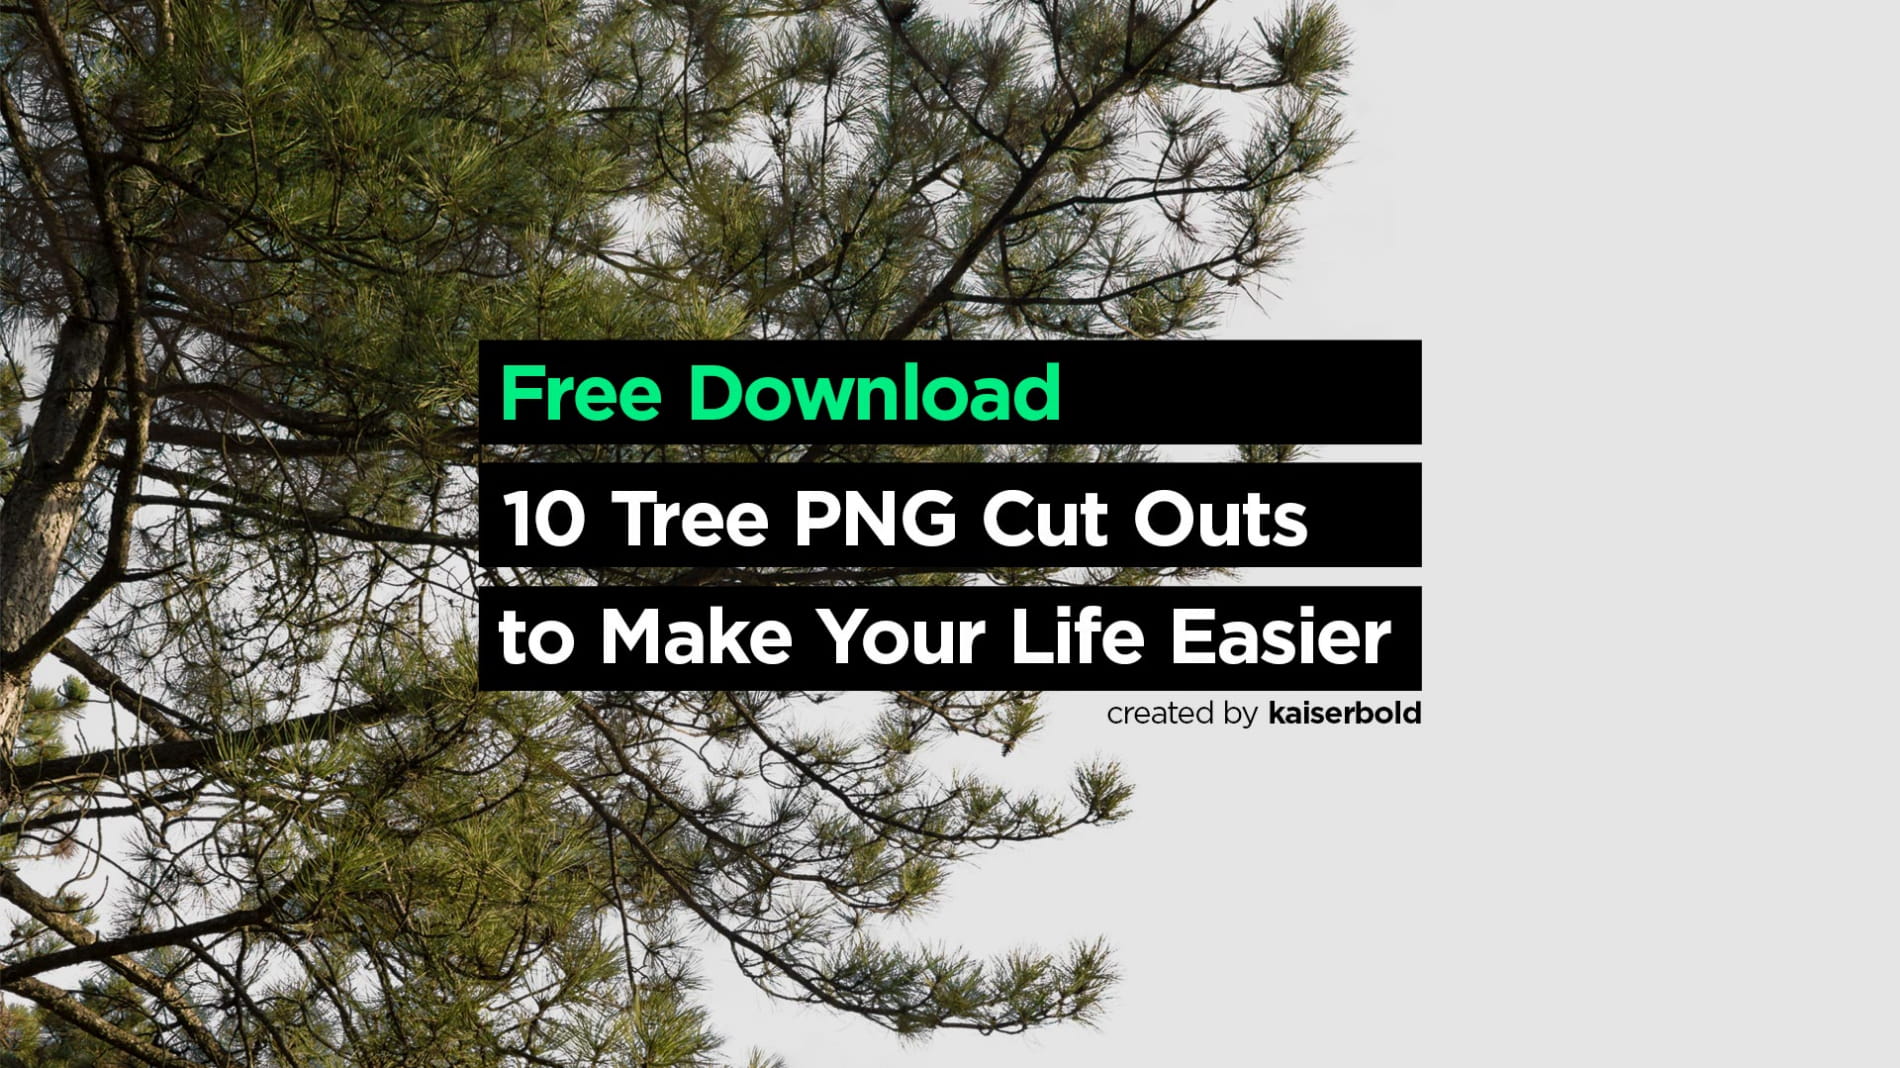 10-png-cut-out-trees-free-for-download